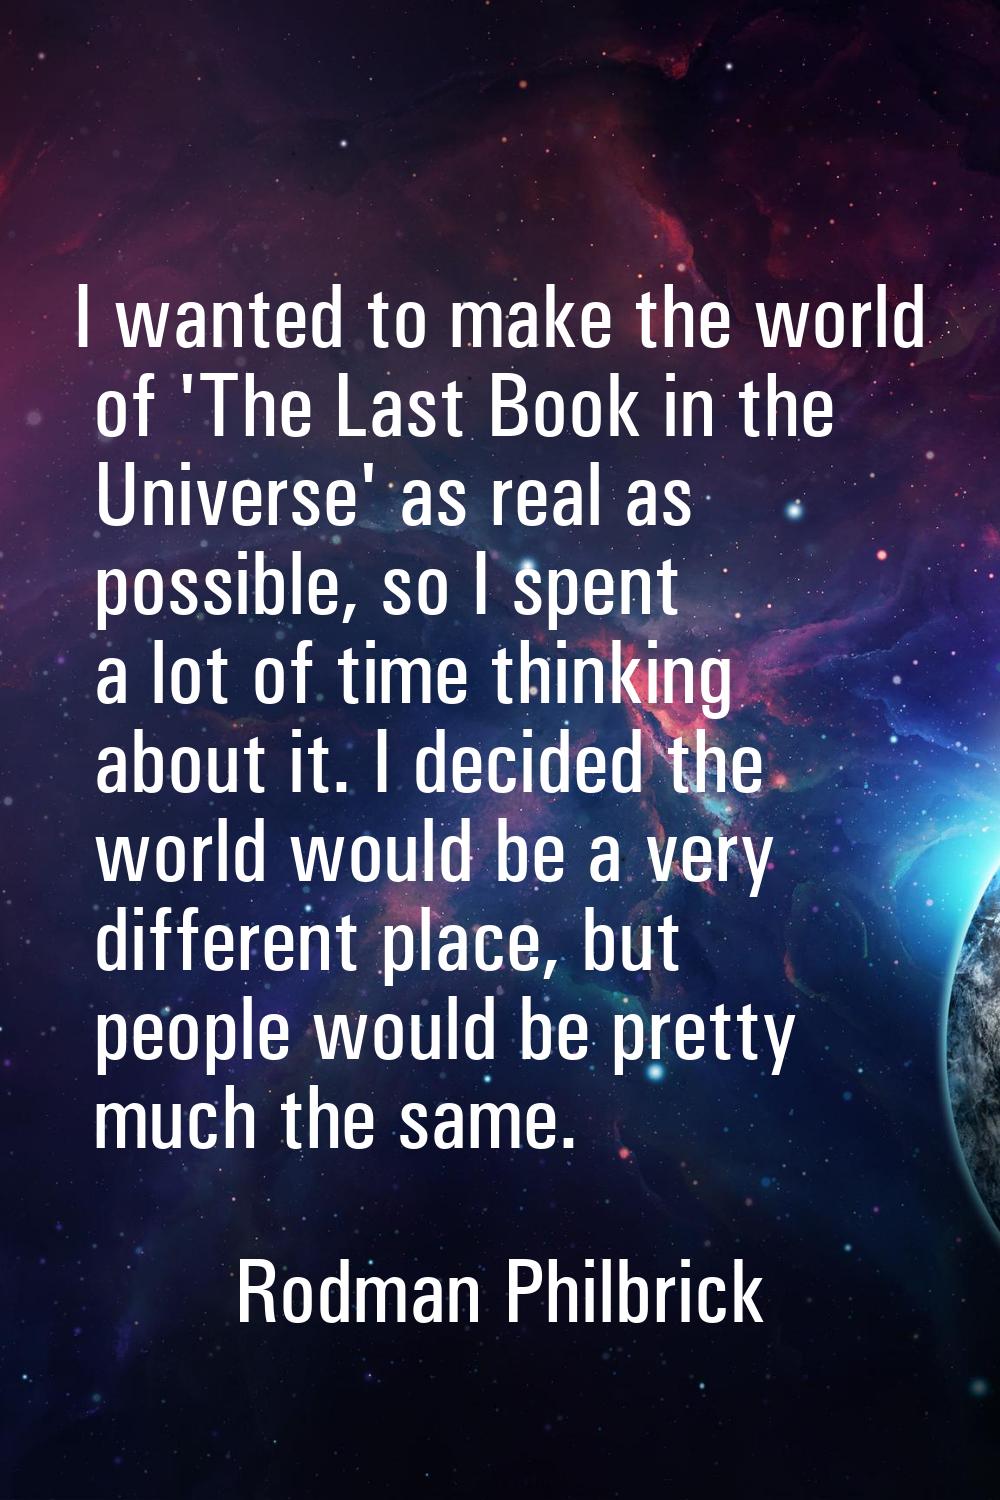 I wanted to make the world of 'The Last Book in the Universe' as real as possible, so I spent a lot